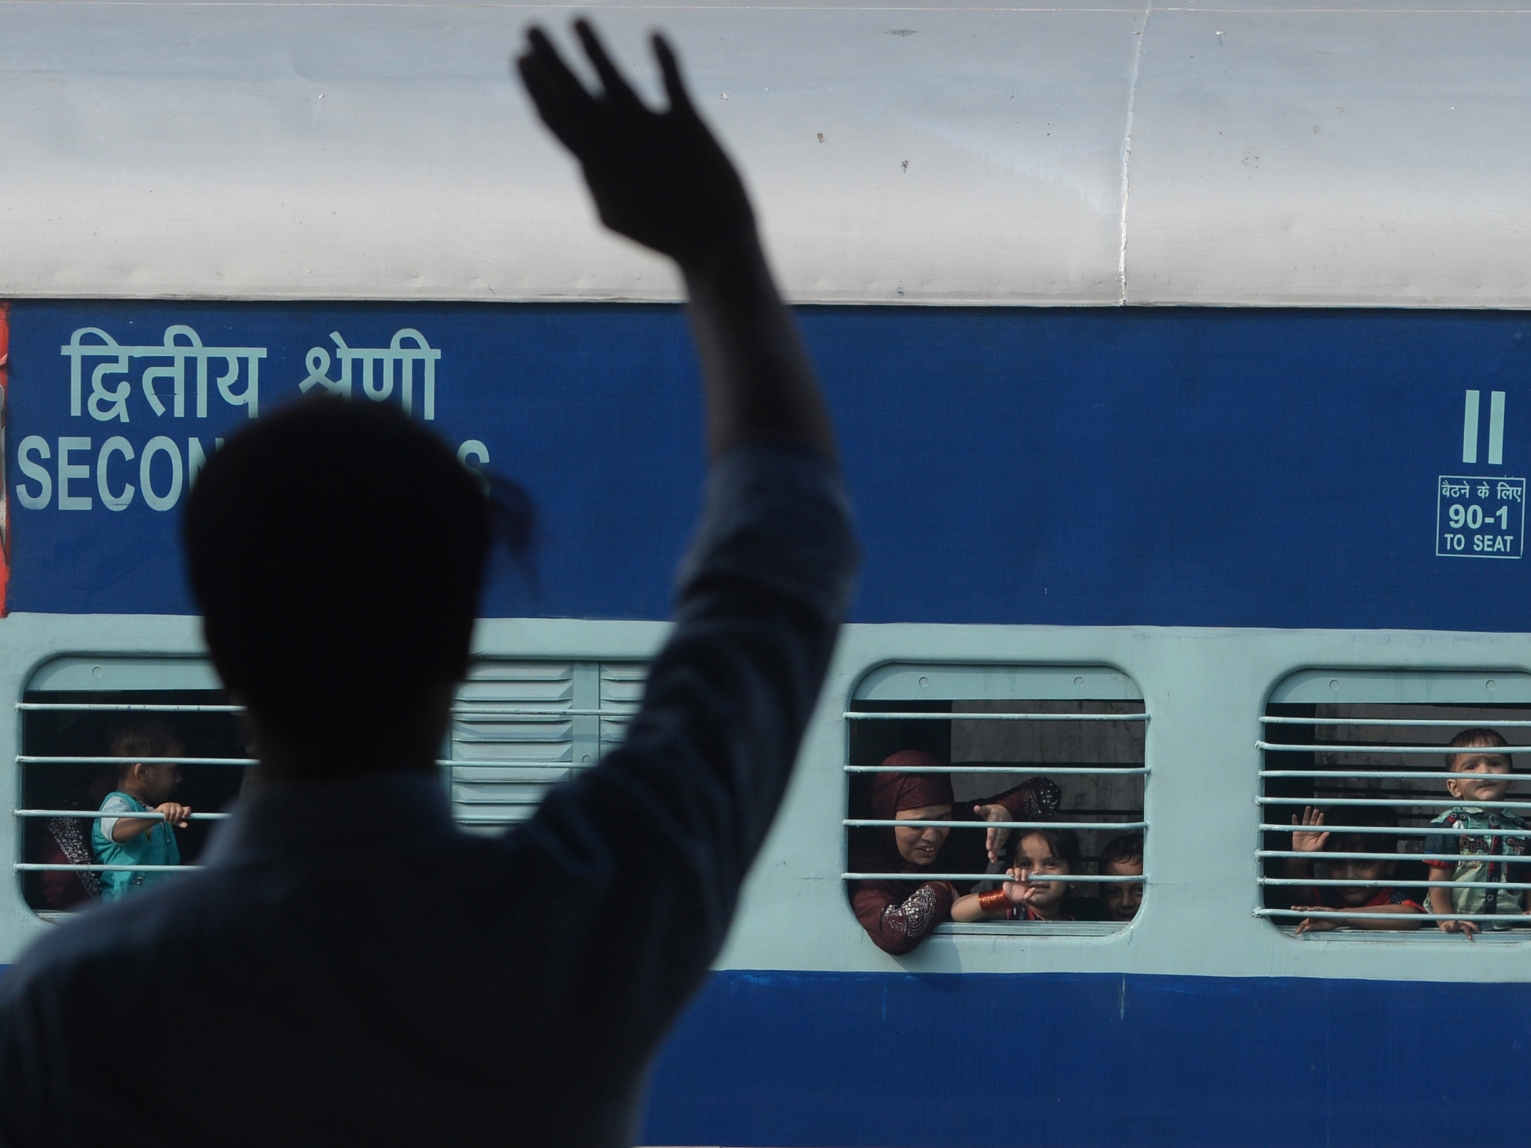 A Pakistani man waves to his Indian Muslim relatives on their departure to India via the Samjhauta Express train, also called the Friendship Express that ran between Delhi and Attari in India and Lahore in Pakistan, at the railway station in Lahore on August 8, 2019. Service was suspended in August 2019 amid worsening diplomatic tensions after India revoked the special status of the state of Jammu and Kashmir.